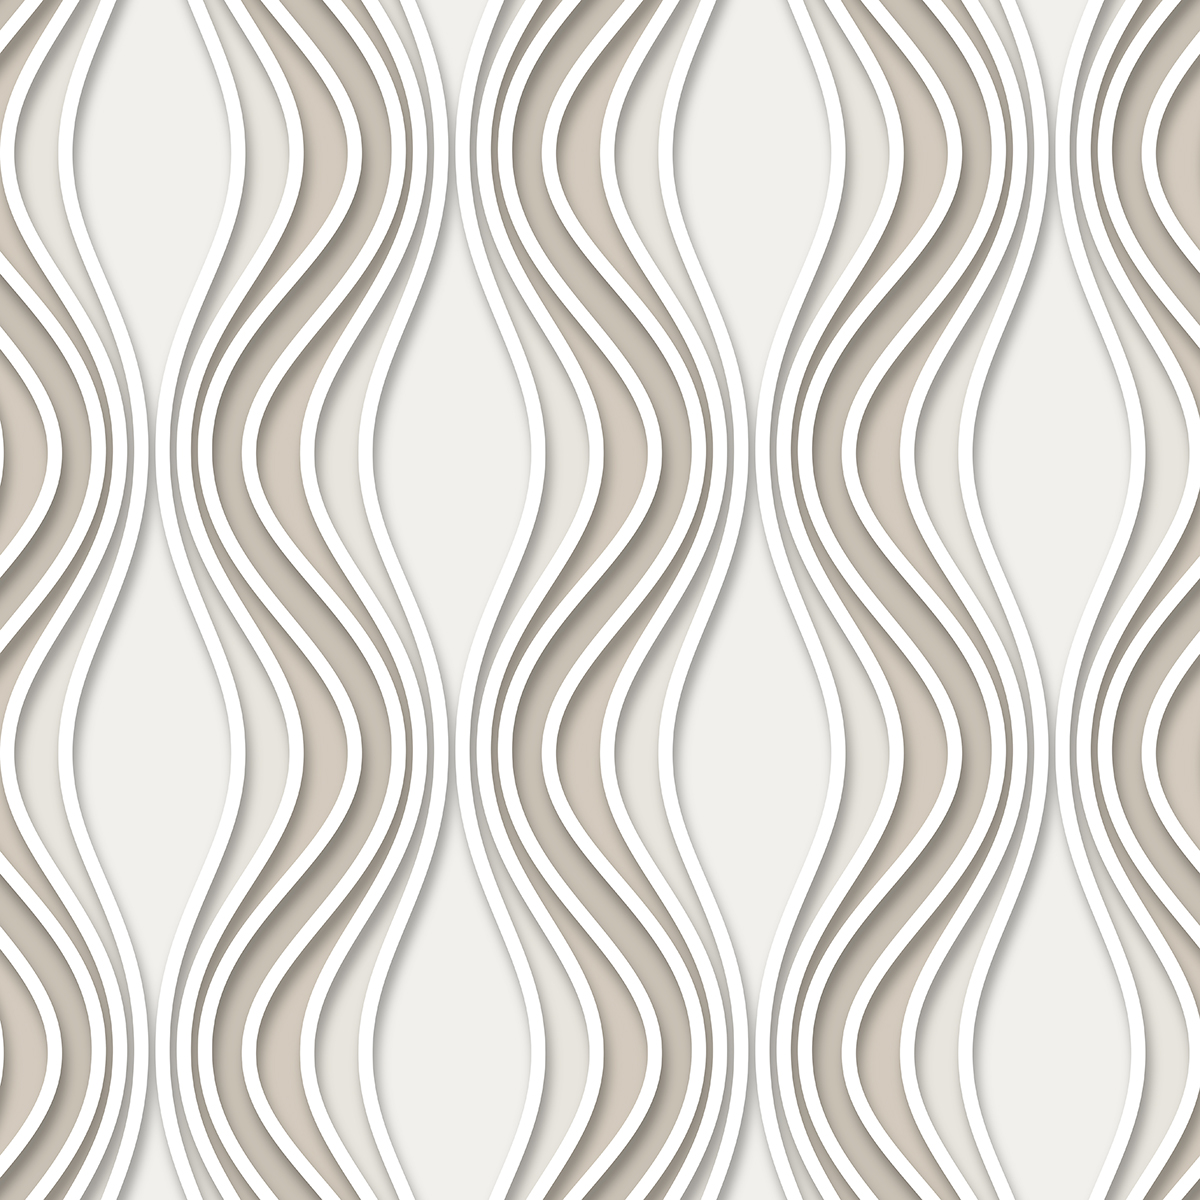 A white and tan wavy pattern